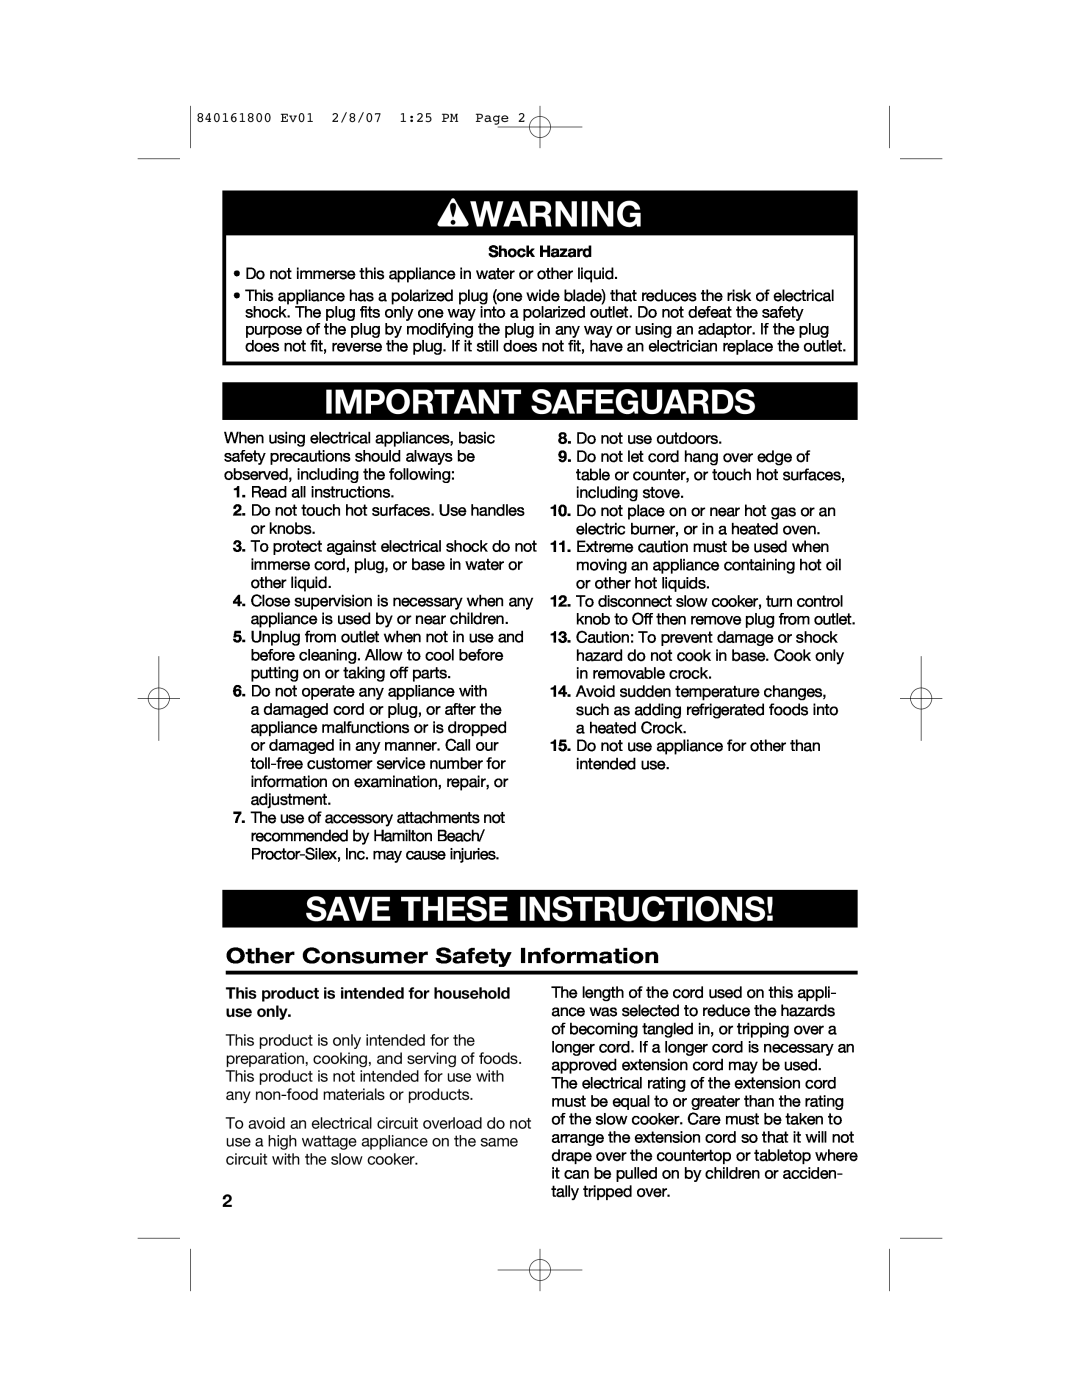 Hamilton Beach 840161800 manual wWARNING, Important Safeguards, Save These Instructions, Other Consumer Safety Information 